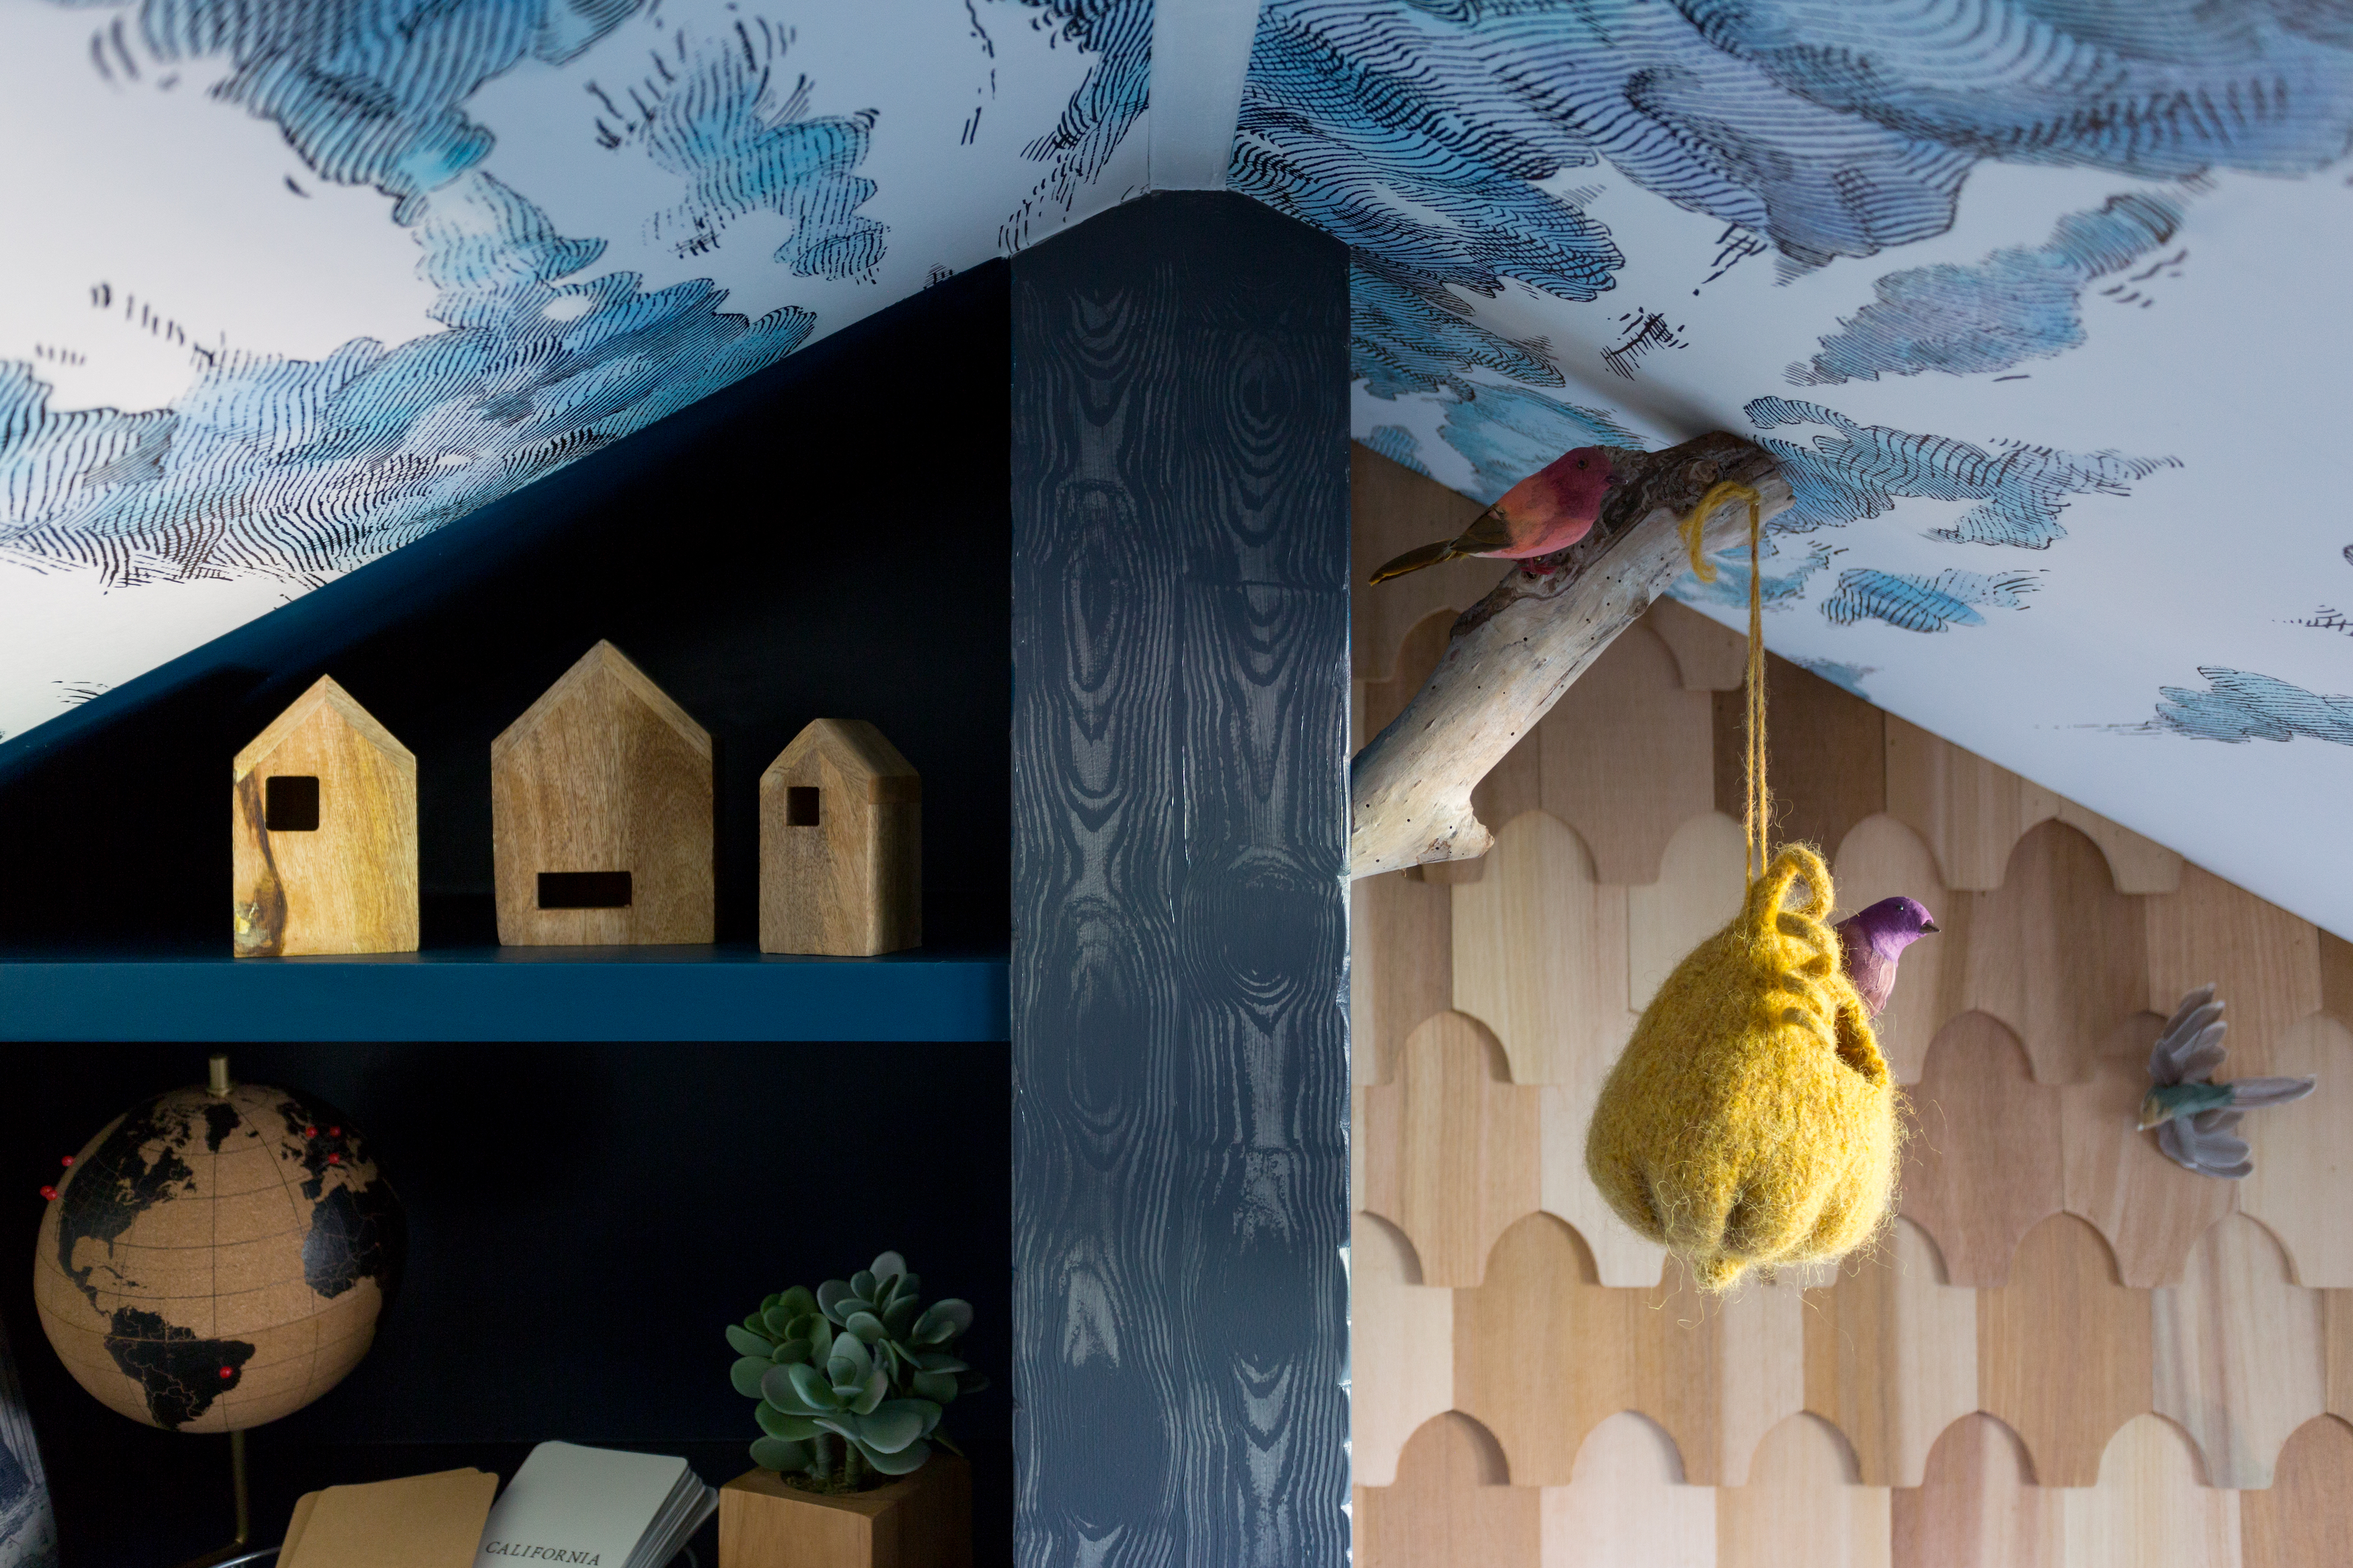 Bookshelves in attic playroom with cloud wallpaper on the ceiling